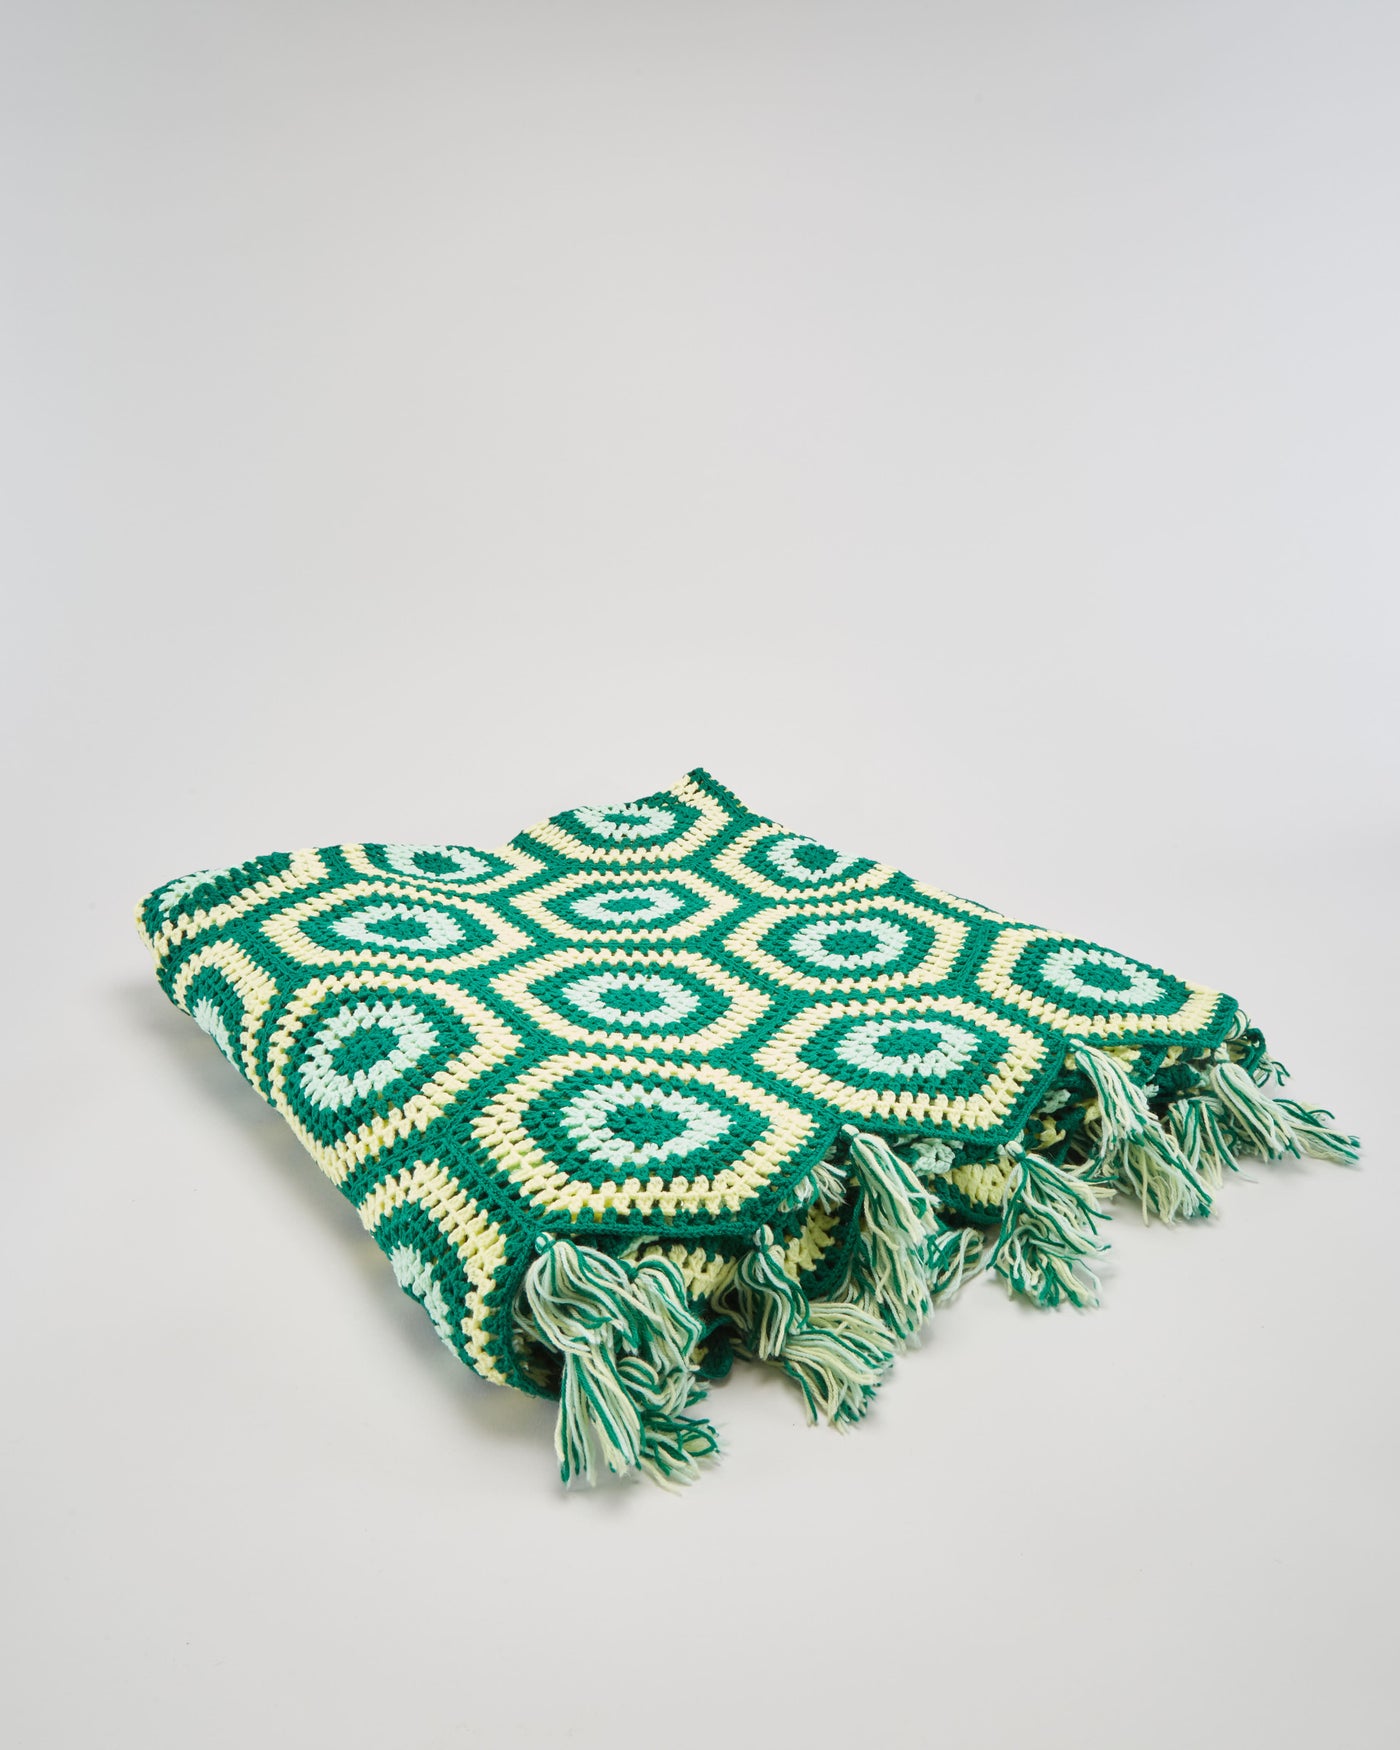 Vintage 1970s Green Crocheted Throw